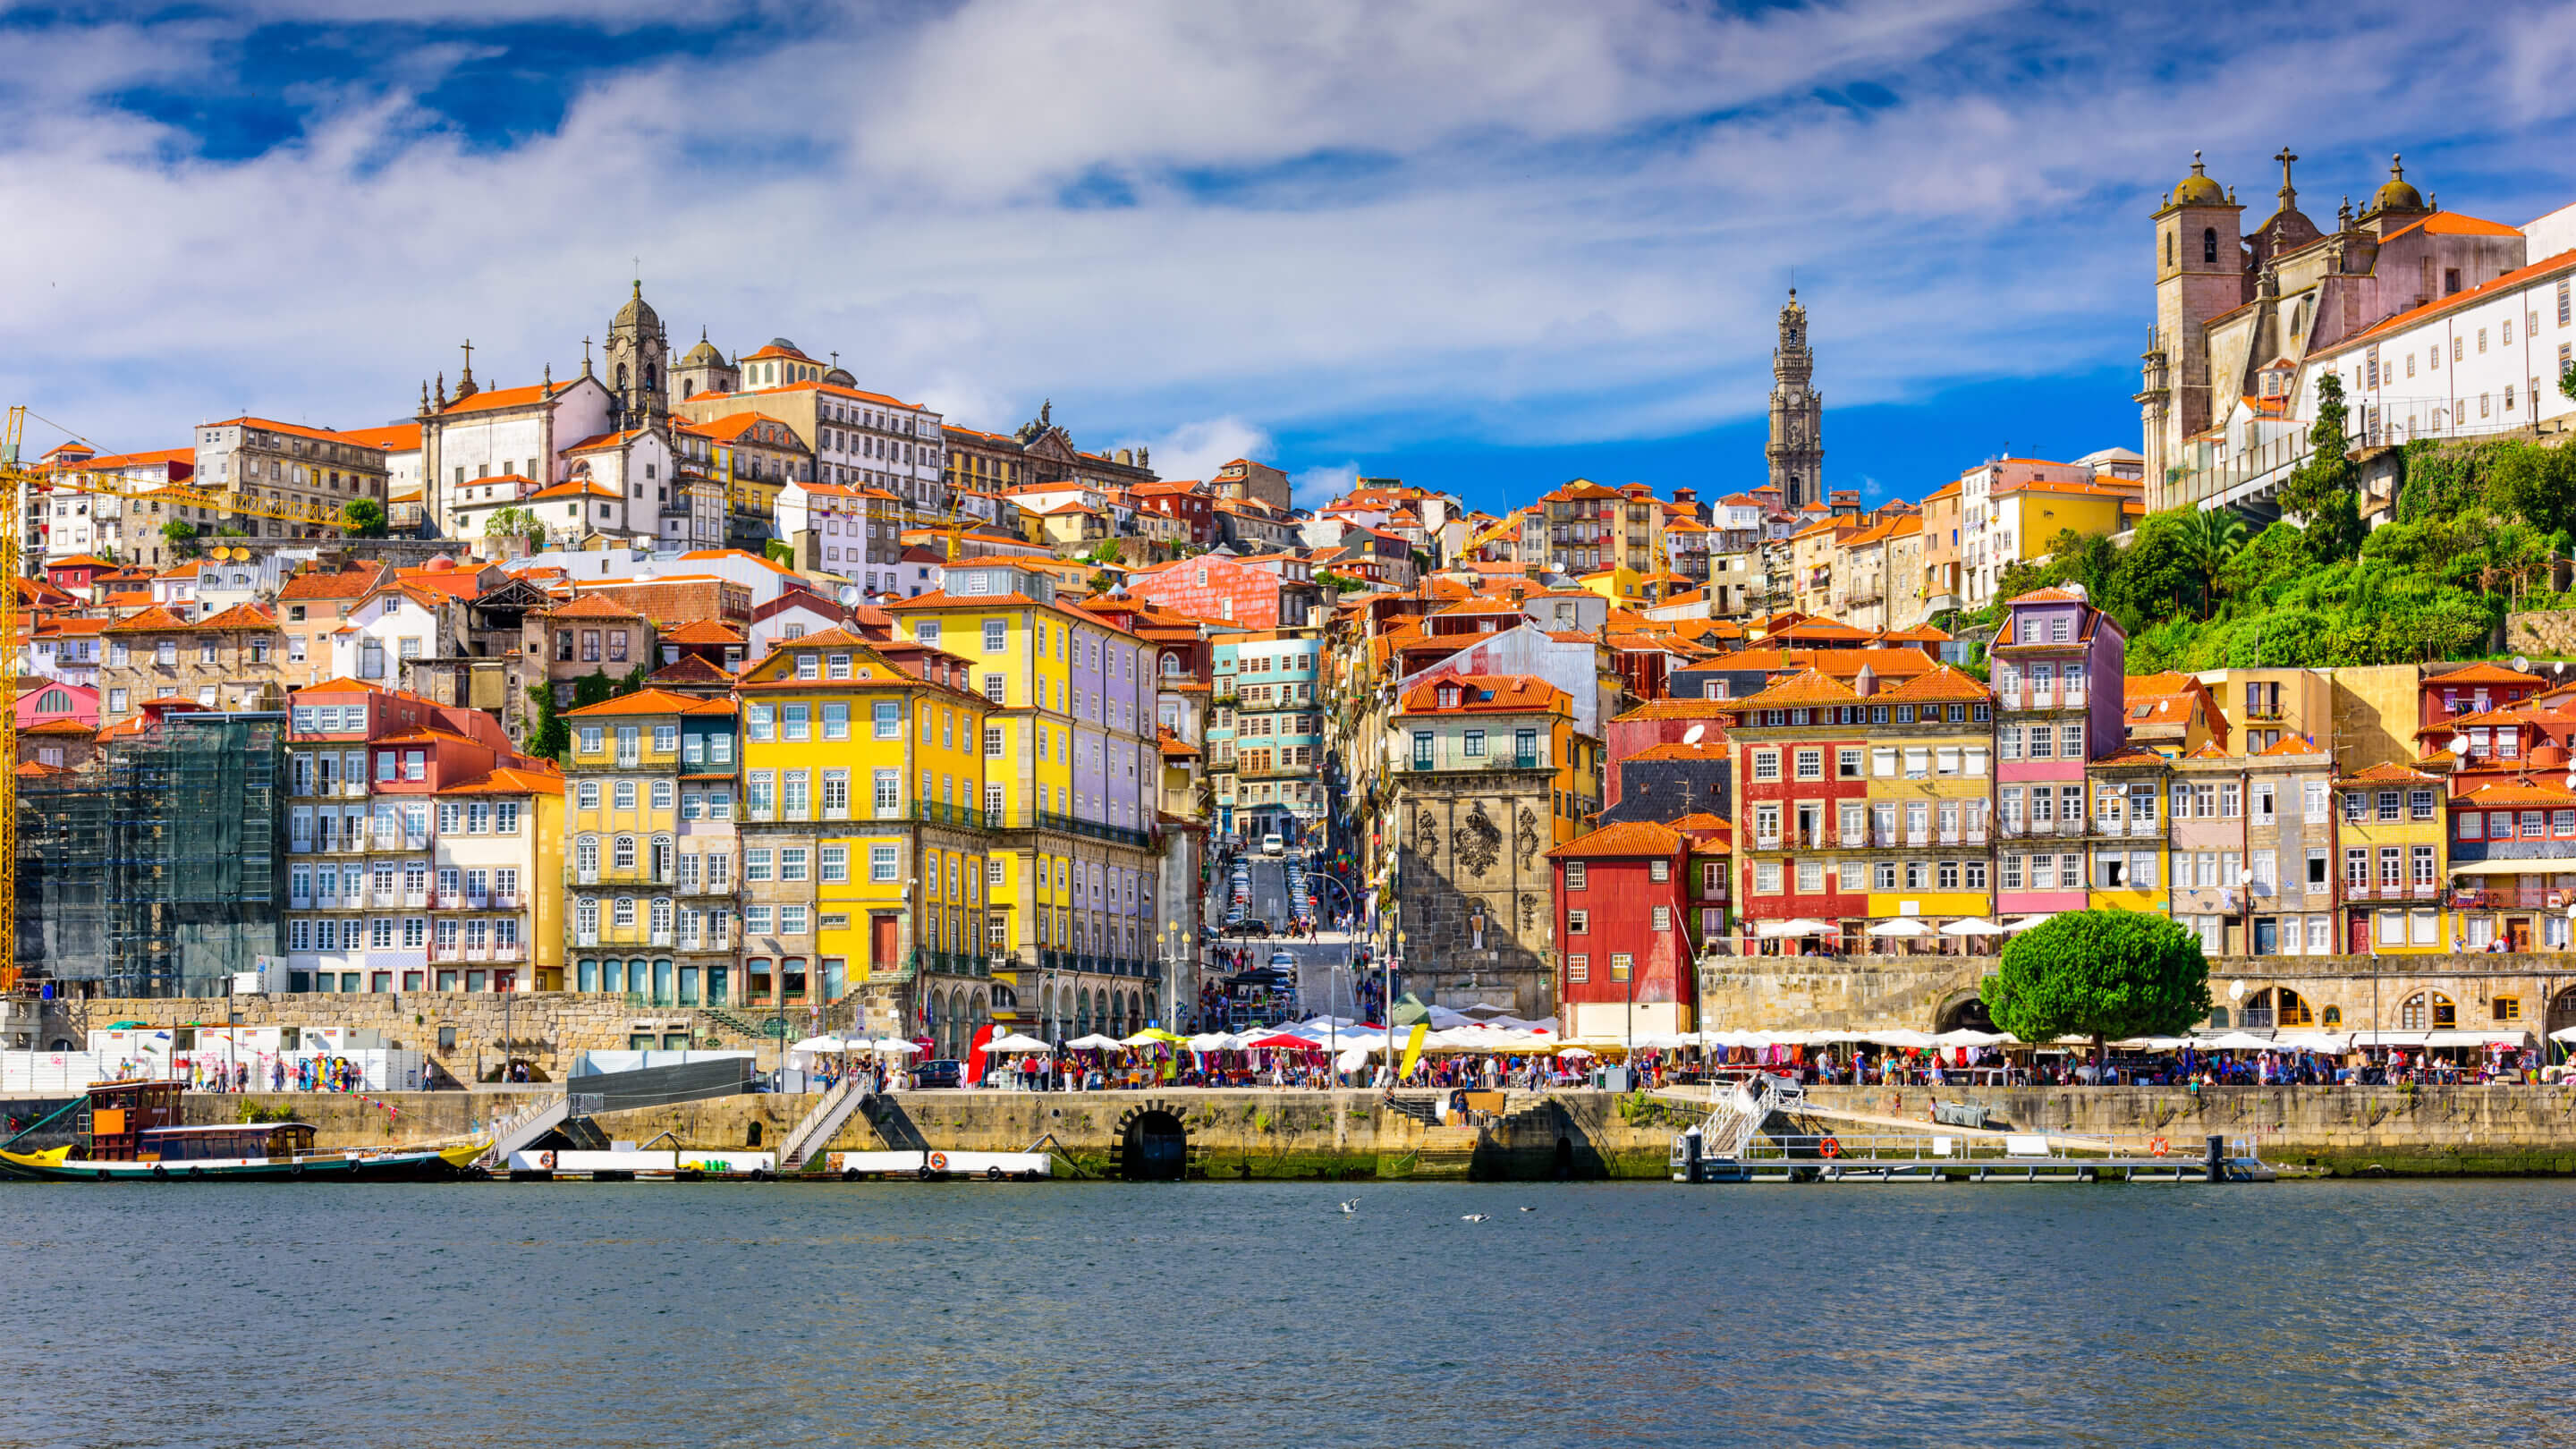 Porto is another well-known tourist attraction